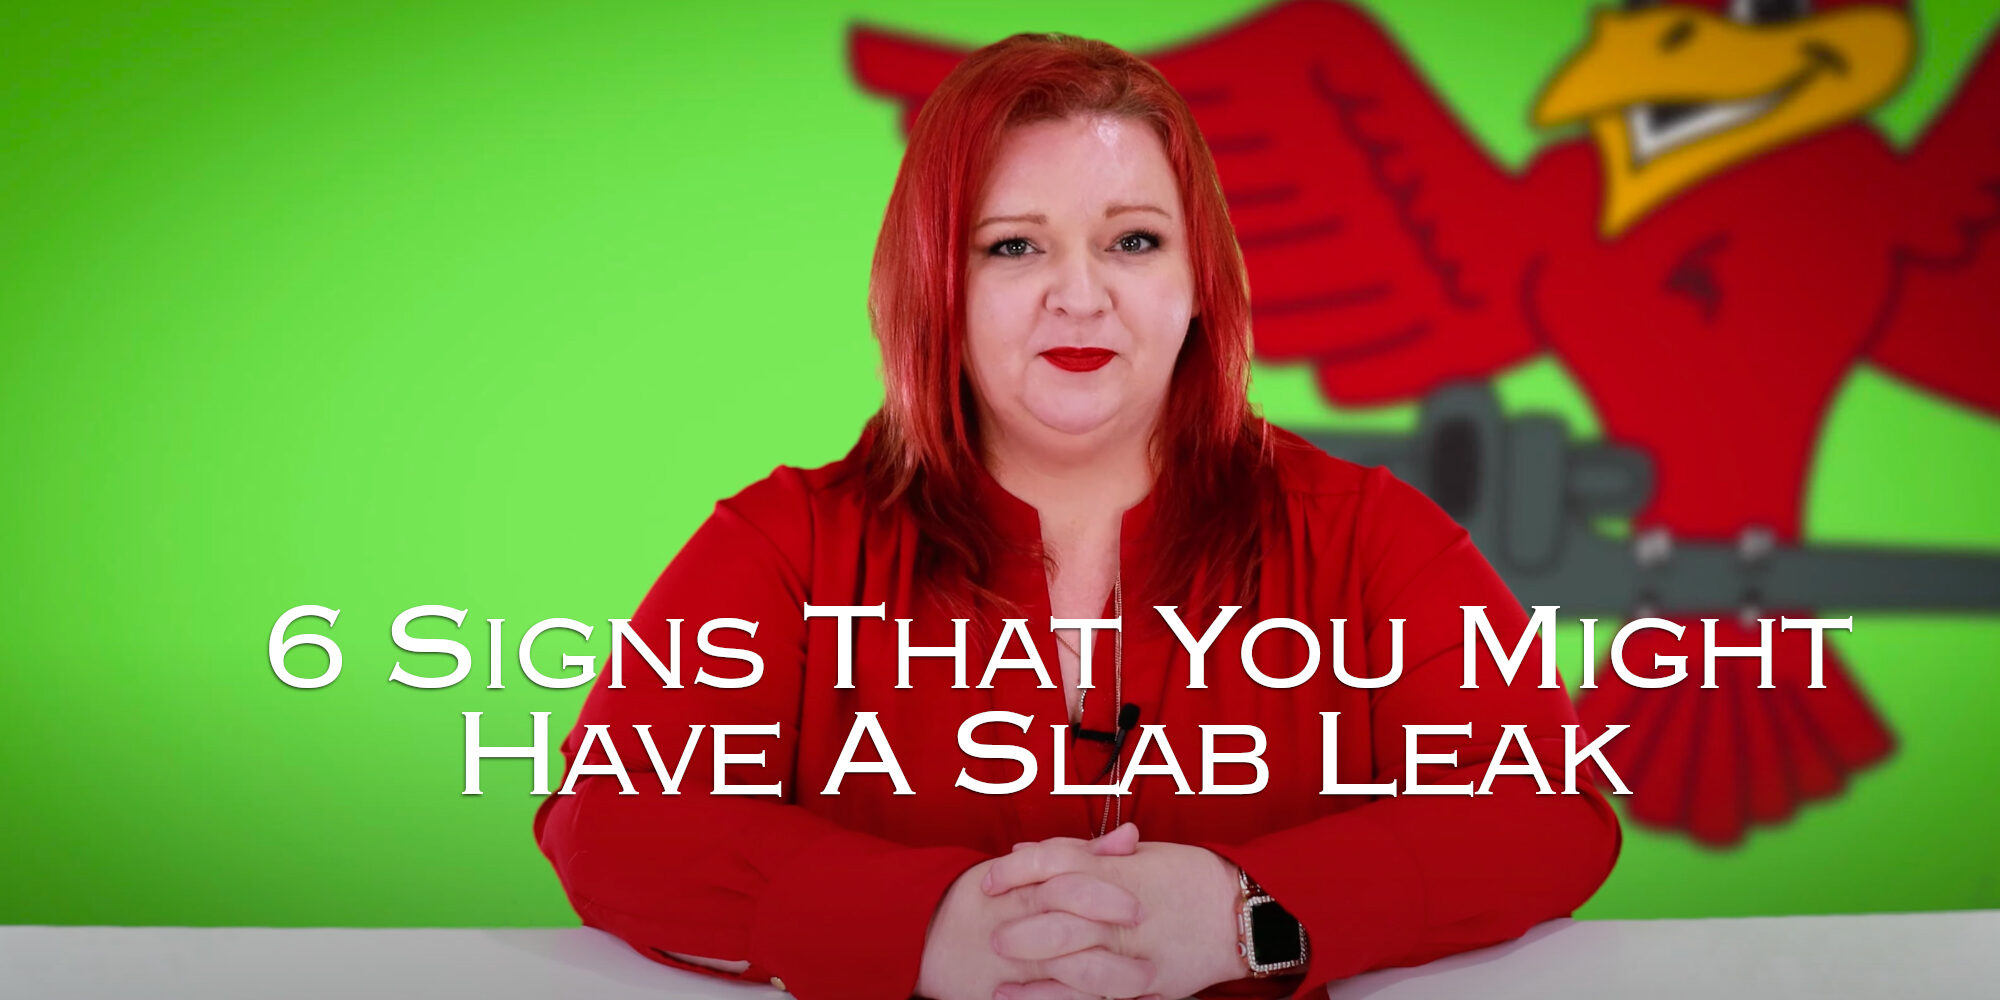 The owner of Robins Plumbing, Stephanie Robins featuring her blog titled '6 Signs That You Might Have A Slab Leak'